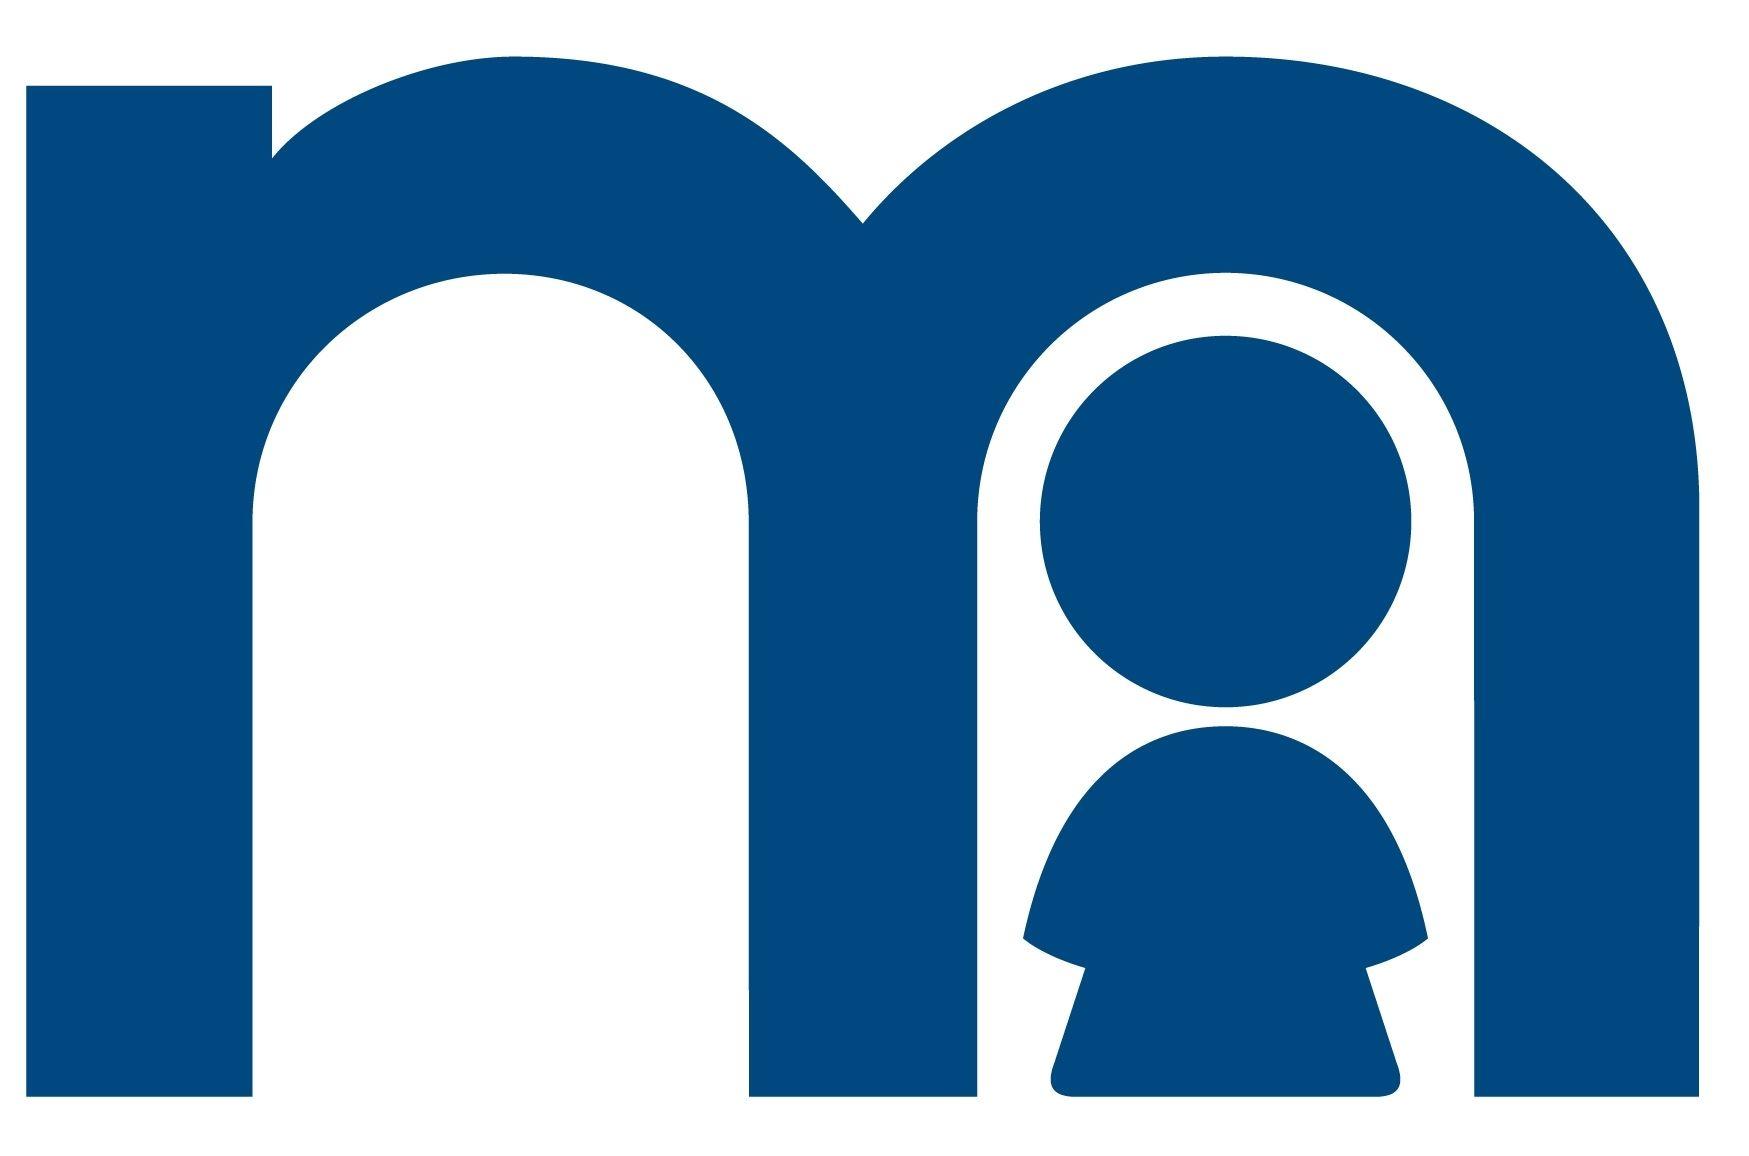 British Retailer Logo - Tommy's and Mothercare | Tommy's